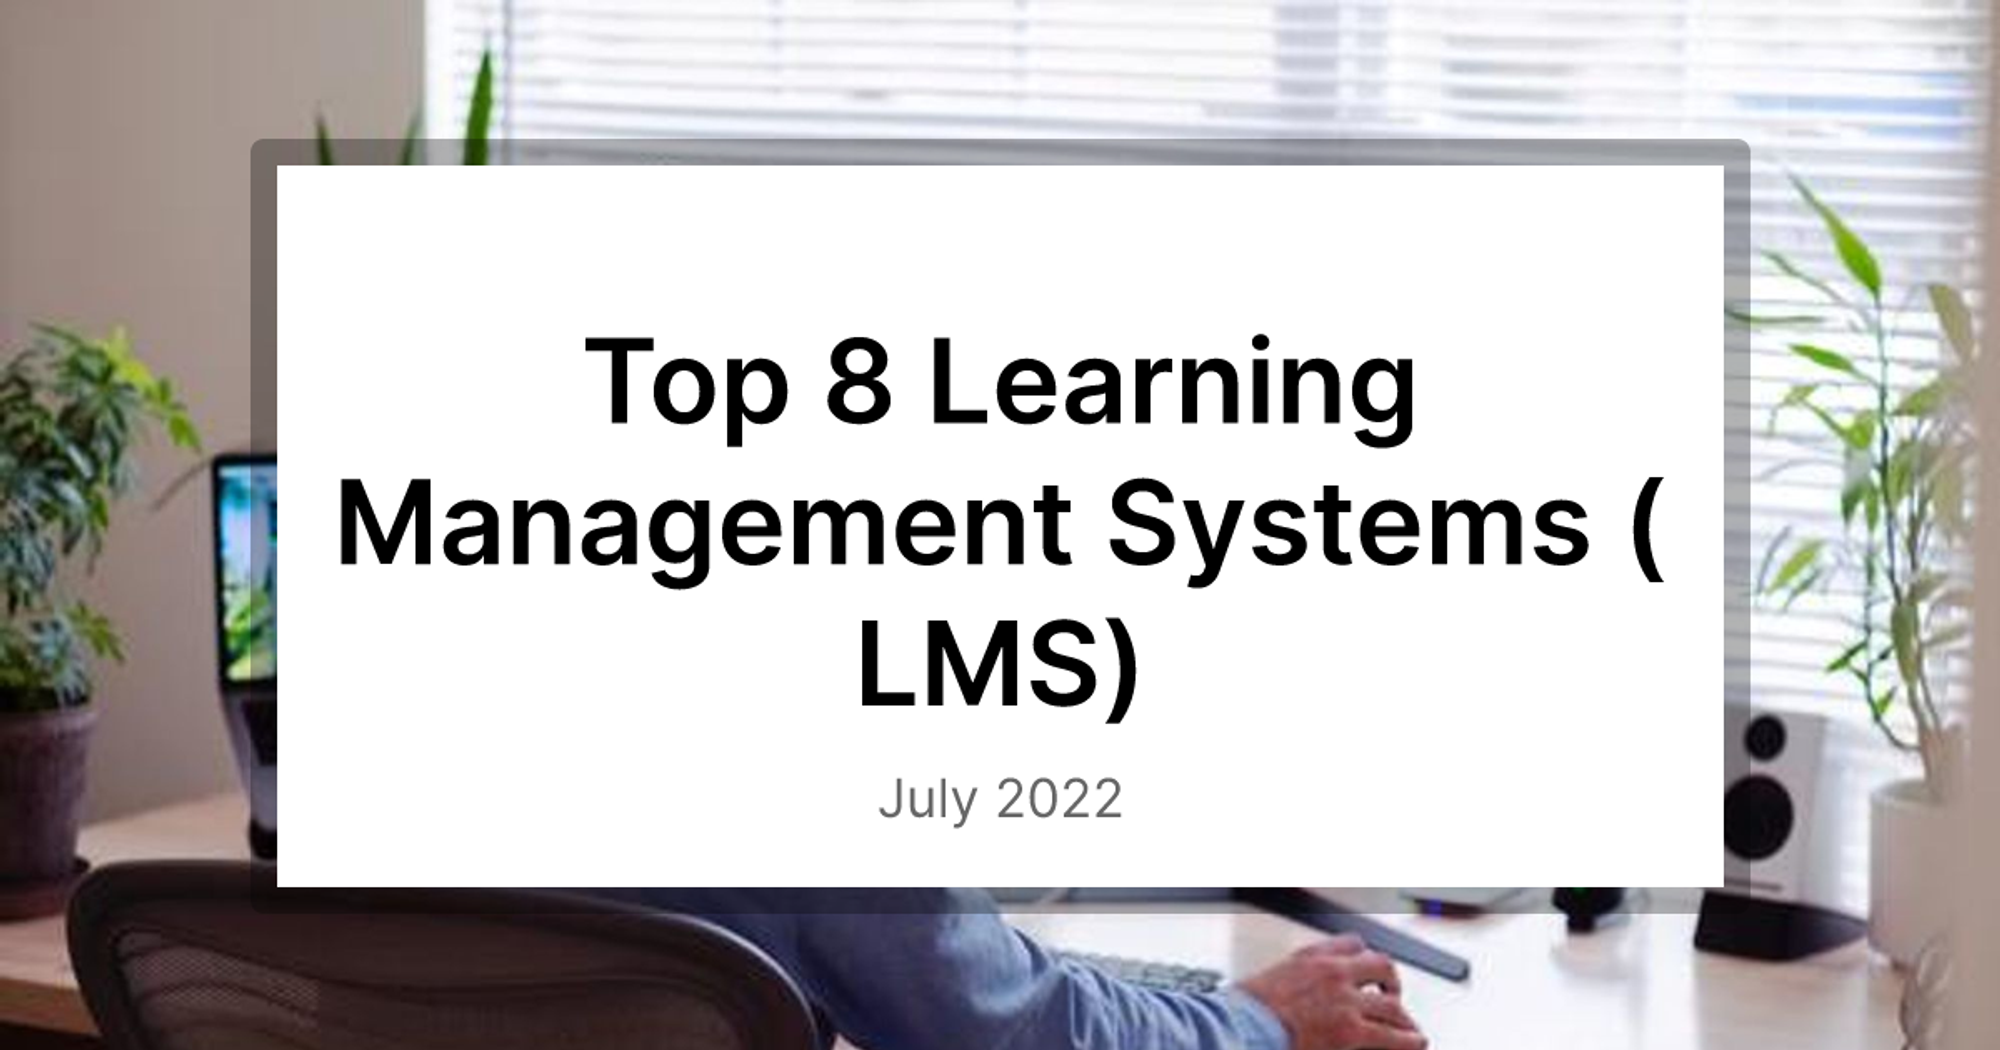 Top 8 Learning Management Systems (LMS)